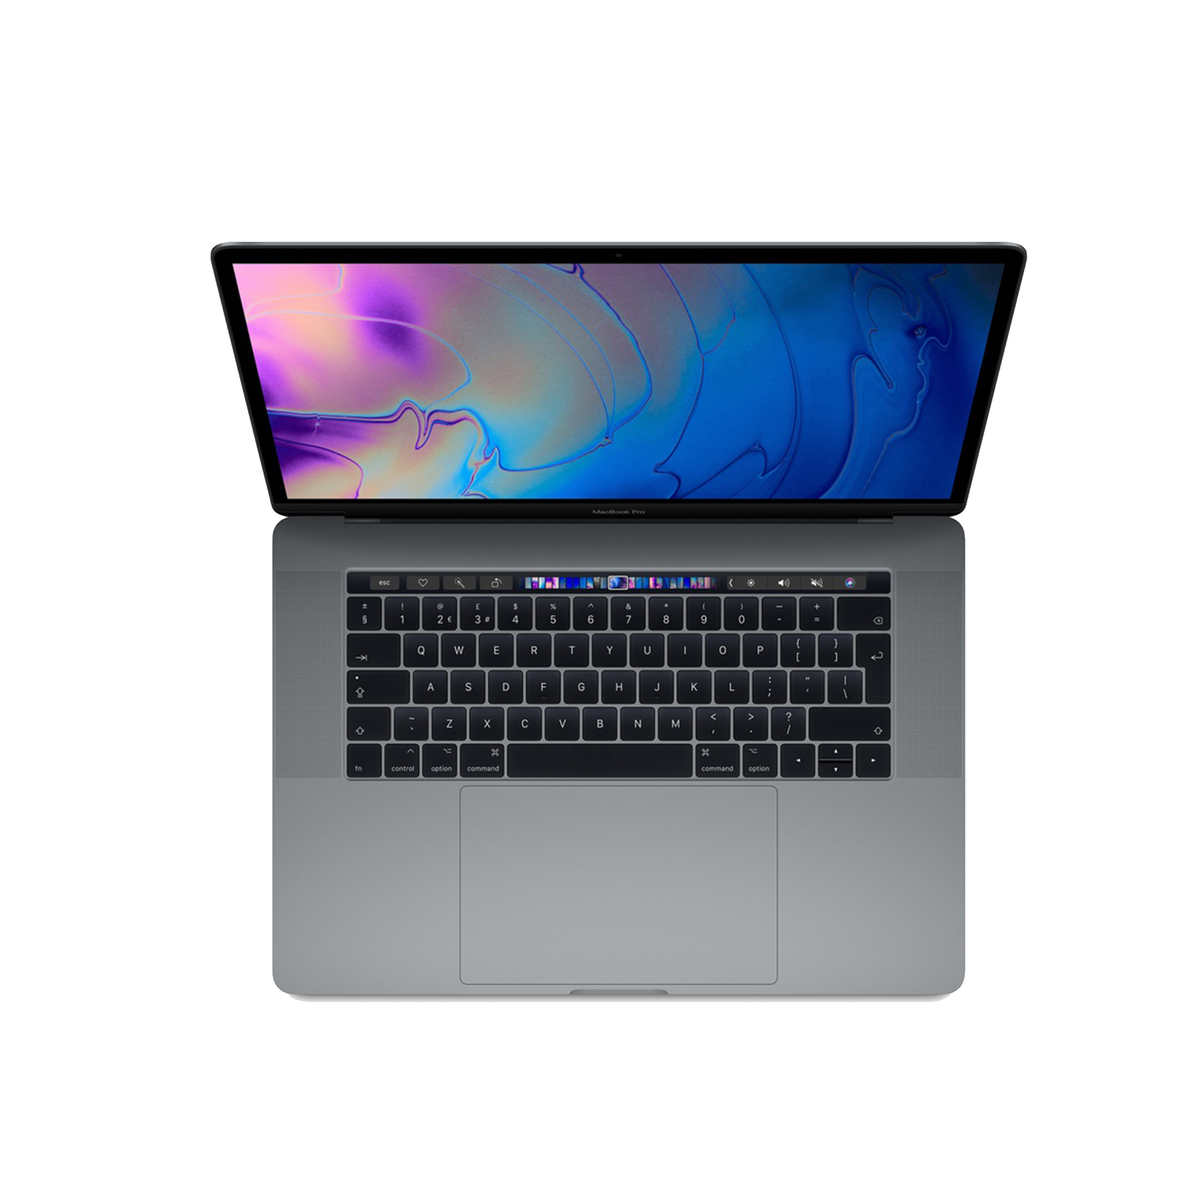 Apple MacBook Pro with Touch Bar 13.3-Inch Retina Display,Core i5/8 GB RAM/128 GB SSD/Space Grey (MUHN2B/A)